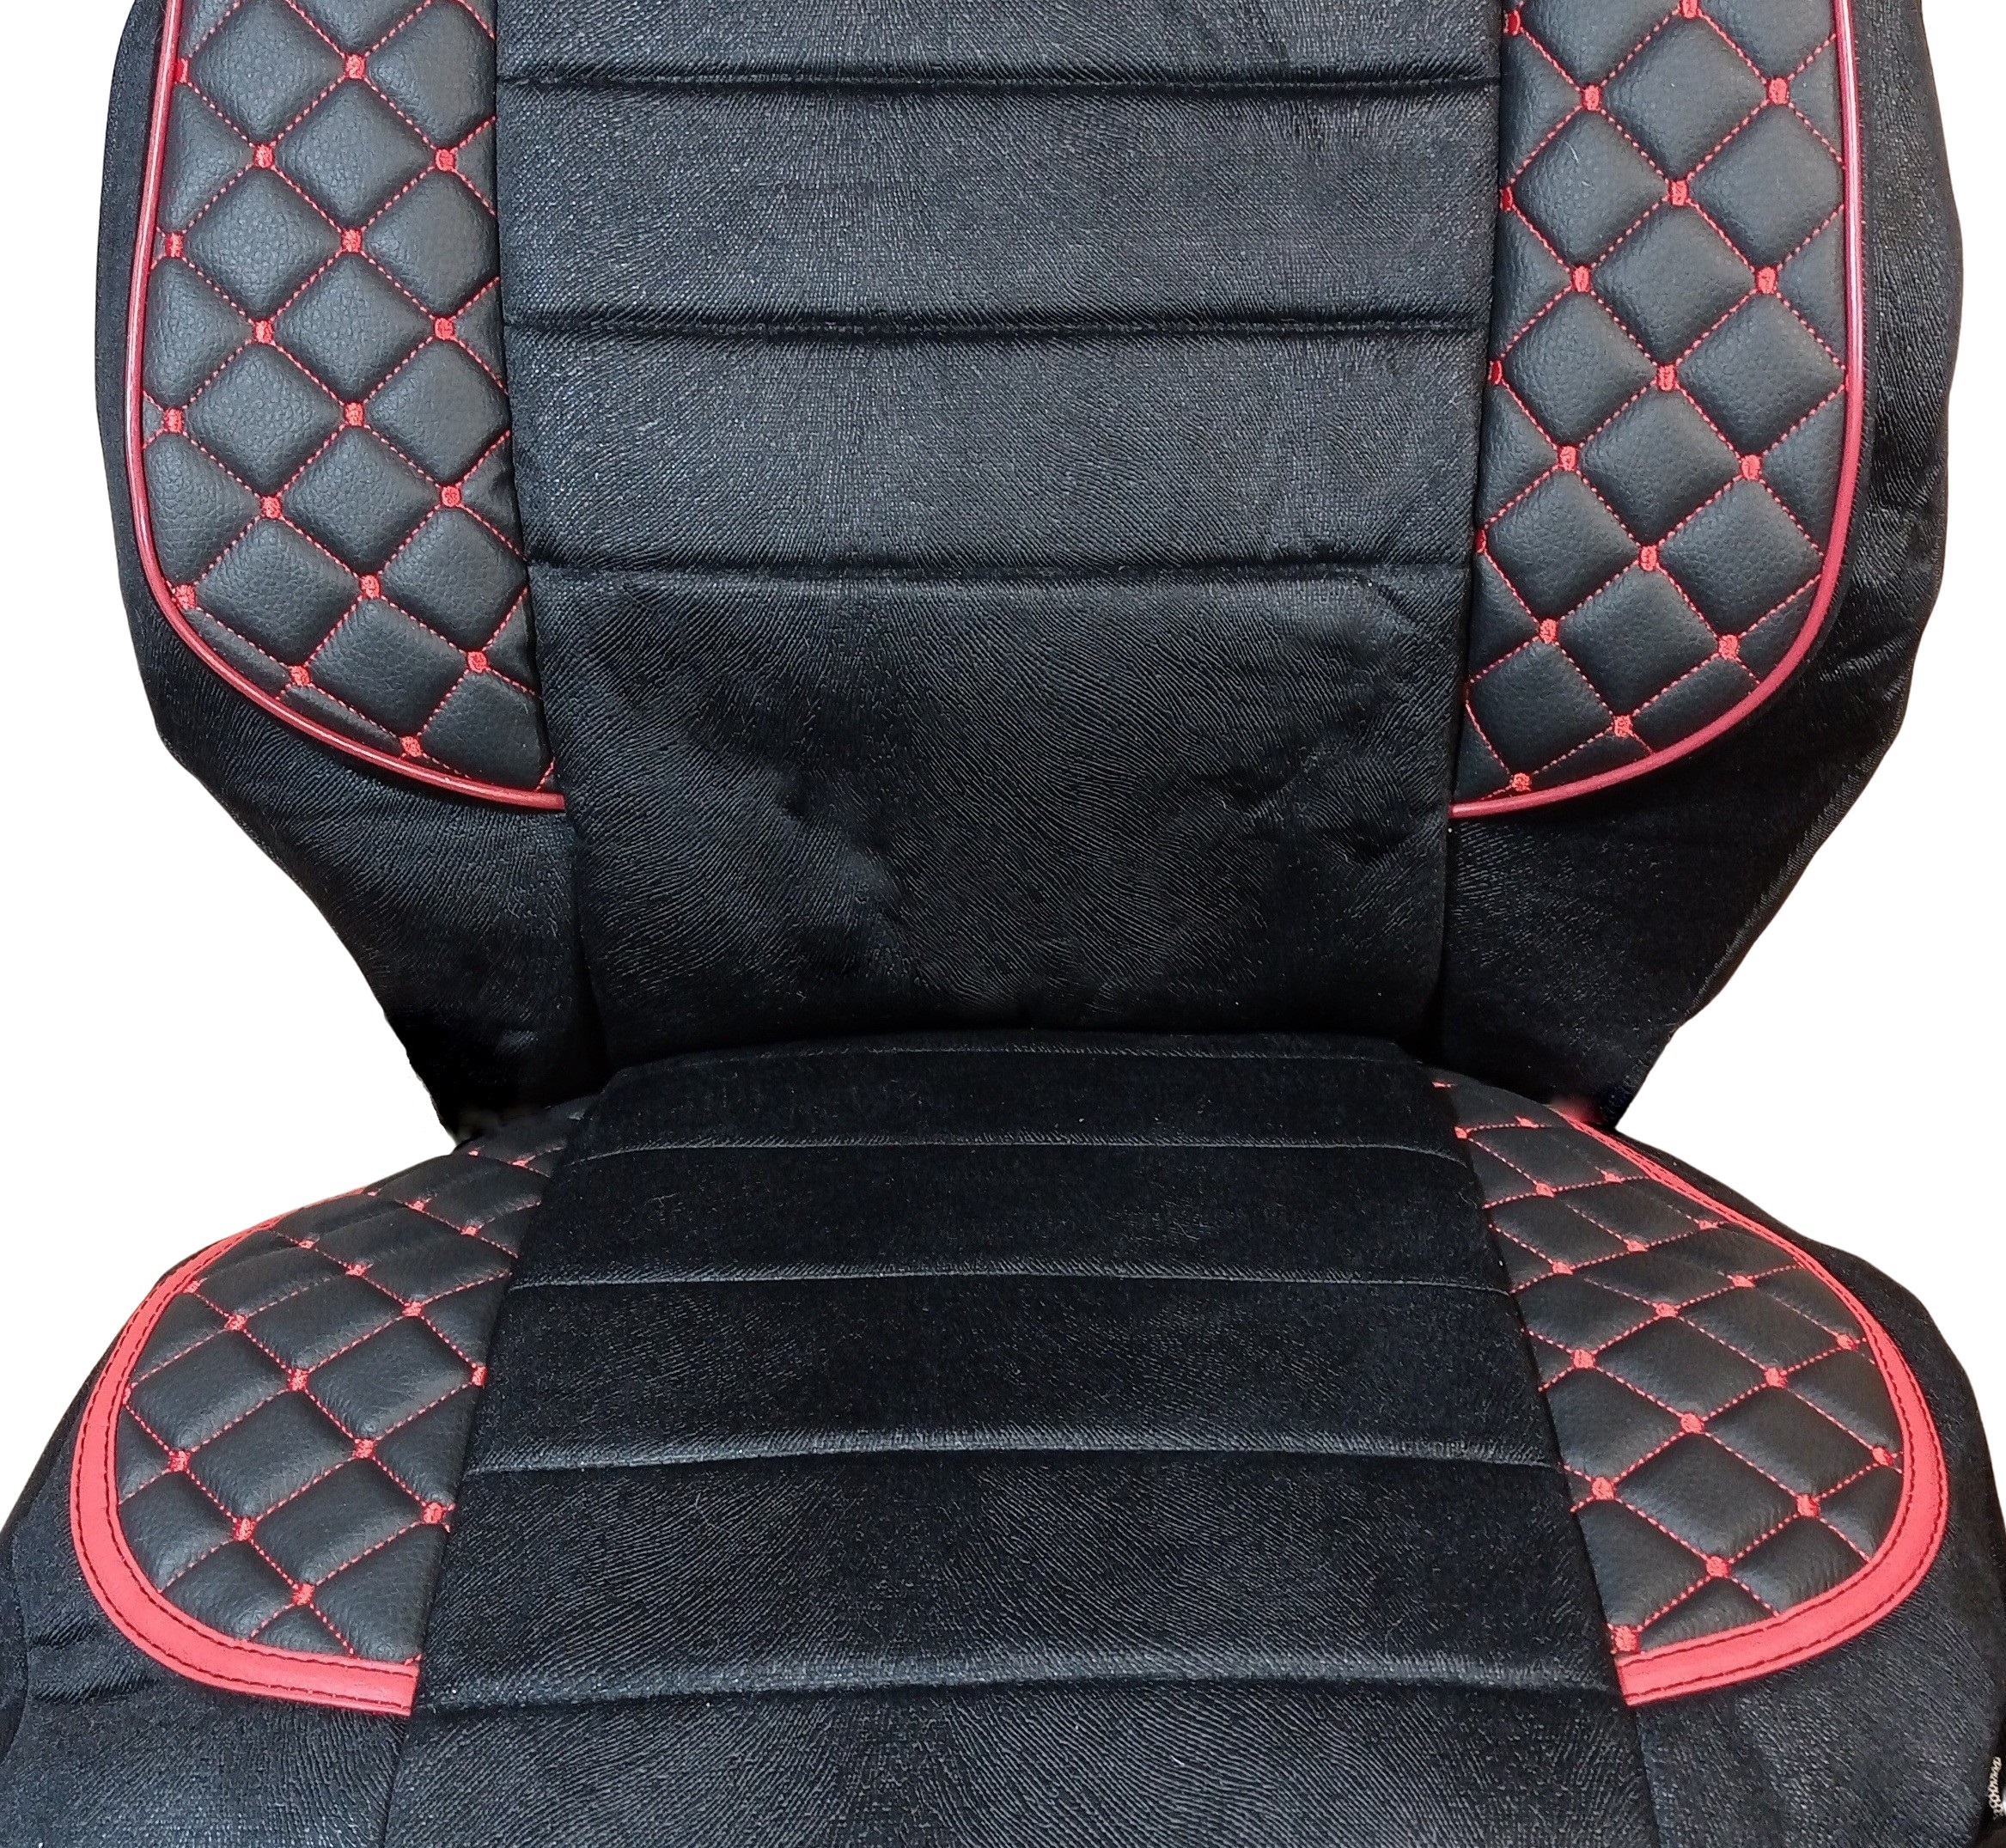 2 x Seat covers for Mercedes Actros MP4 EURO 6 2015-2021 Truck Black Leather Textile LHR RHD